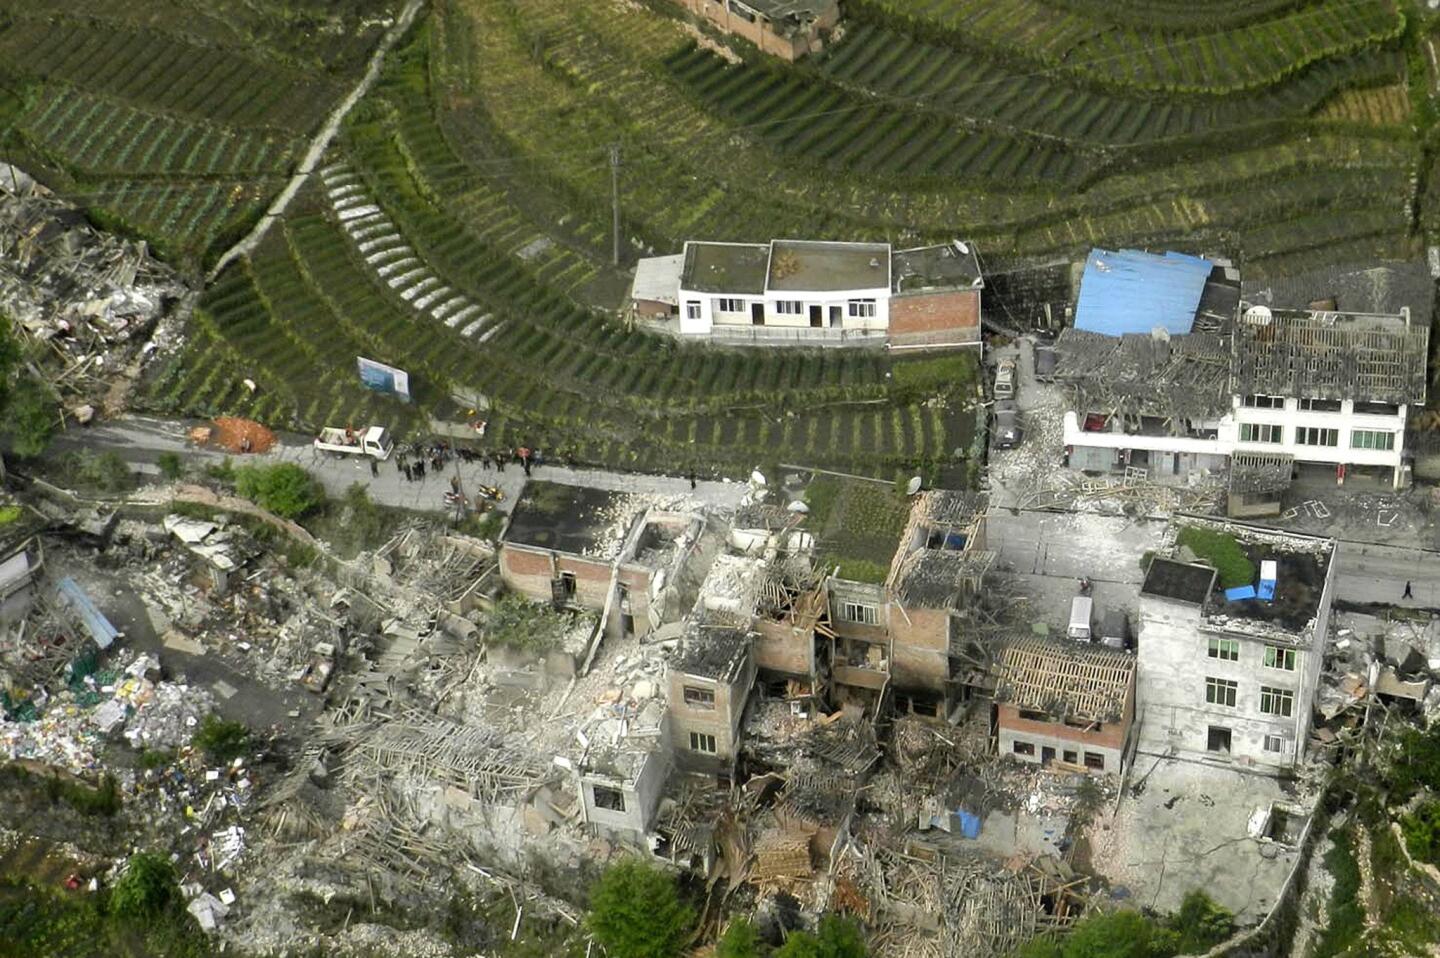 This aerial photo released by China's Xinhua news agency shows destroyed houses after a powerful earthquake hit Lushan County's Ya'an City in China's Sichuan Province. The powerful earthquake jolted the province near where a devastating quake struck five years ago.